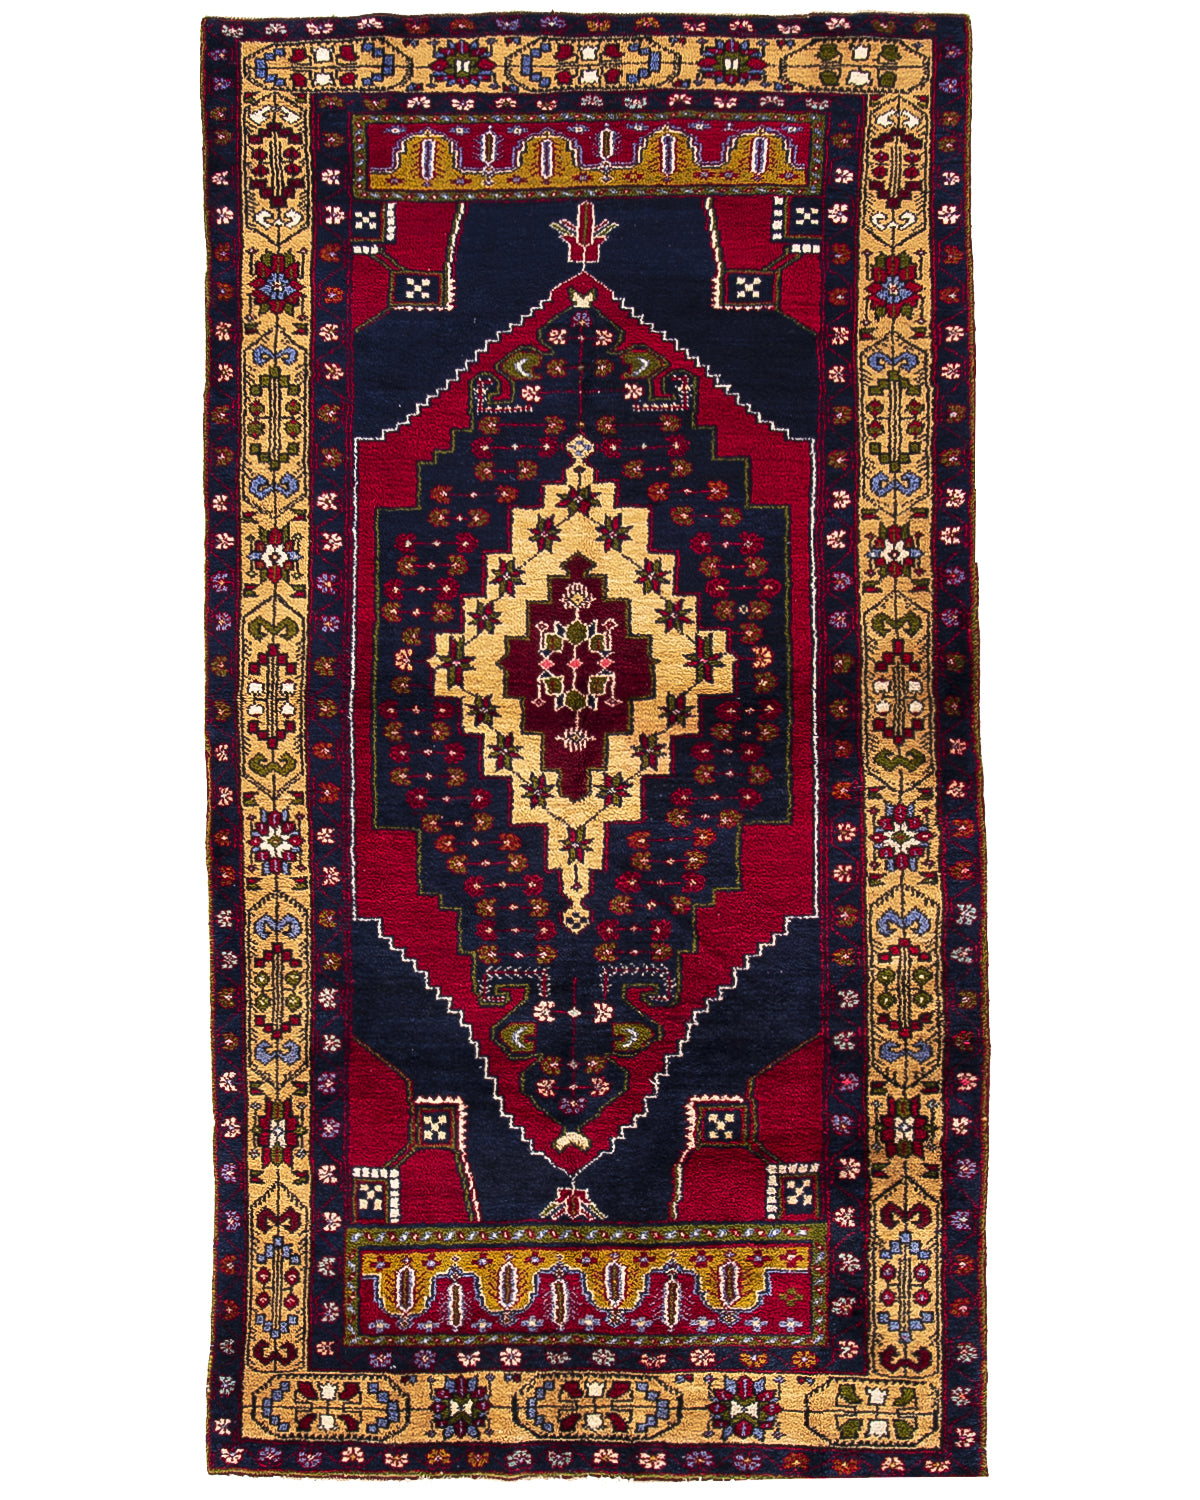 Oriental Rug Anatolian Hand Knotted Wool On Wool 145 X 272 Cm - 4' 10'' X 9' Navy Blue C012 ER12